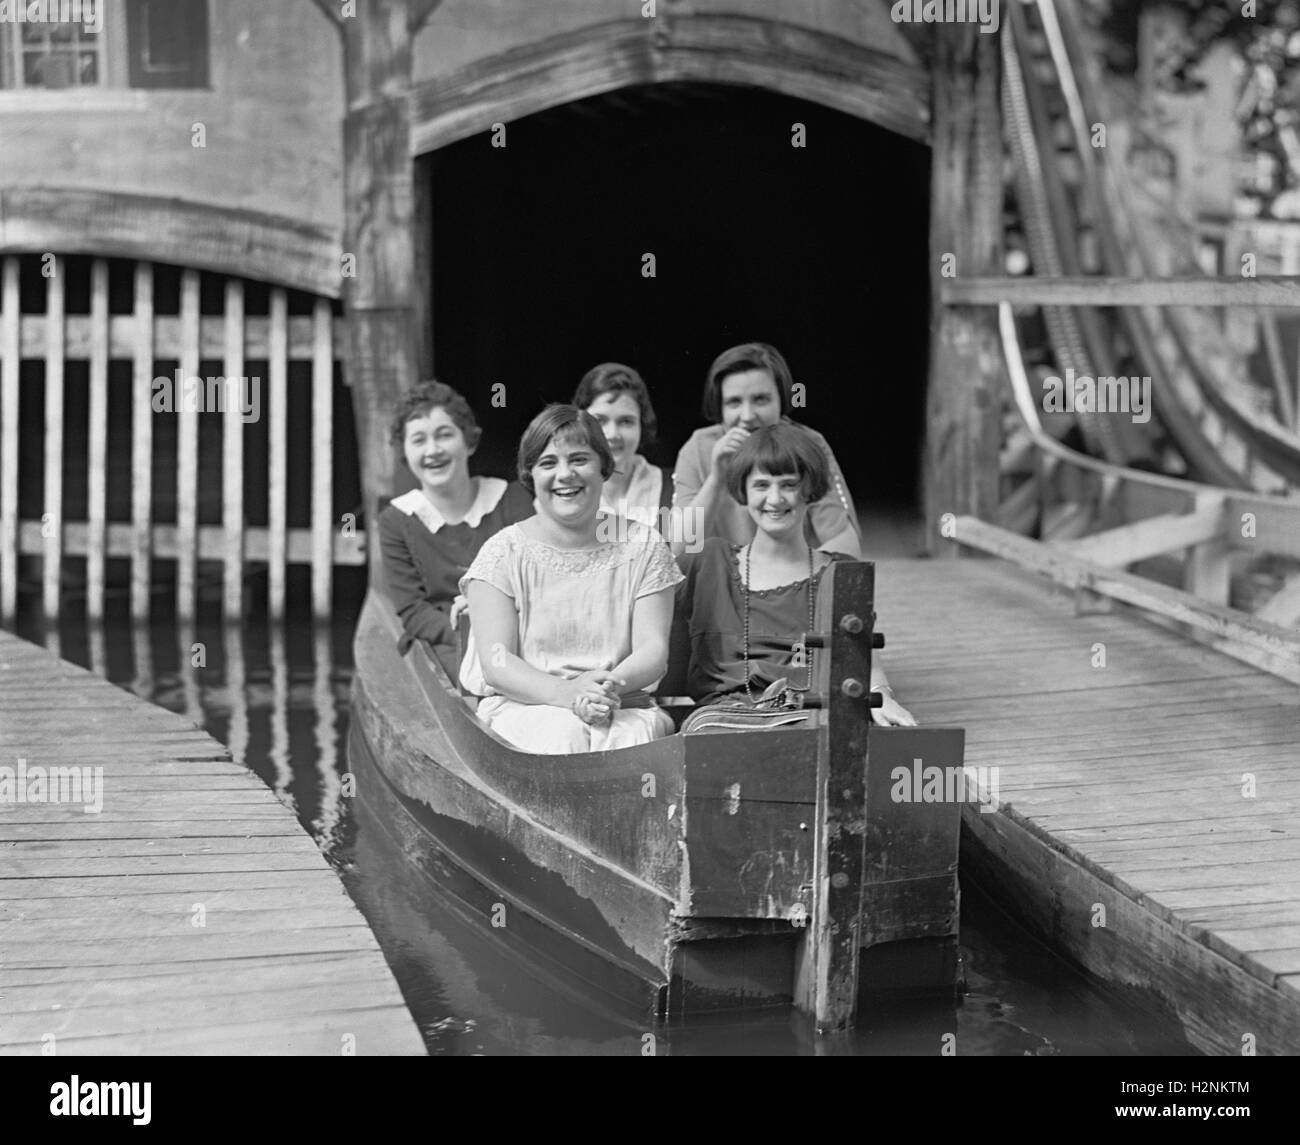 Group of Women from Elks Club on Amusement Park Water Ride, Glen Echo Park, Glen Echo, Maryland, USA, National Photo Company, August 1924 Stock Photo